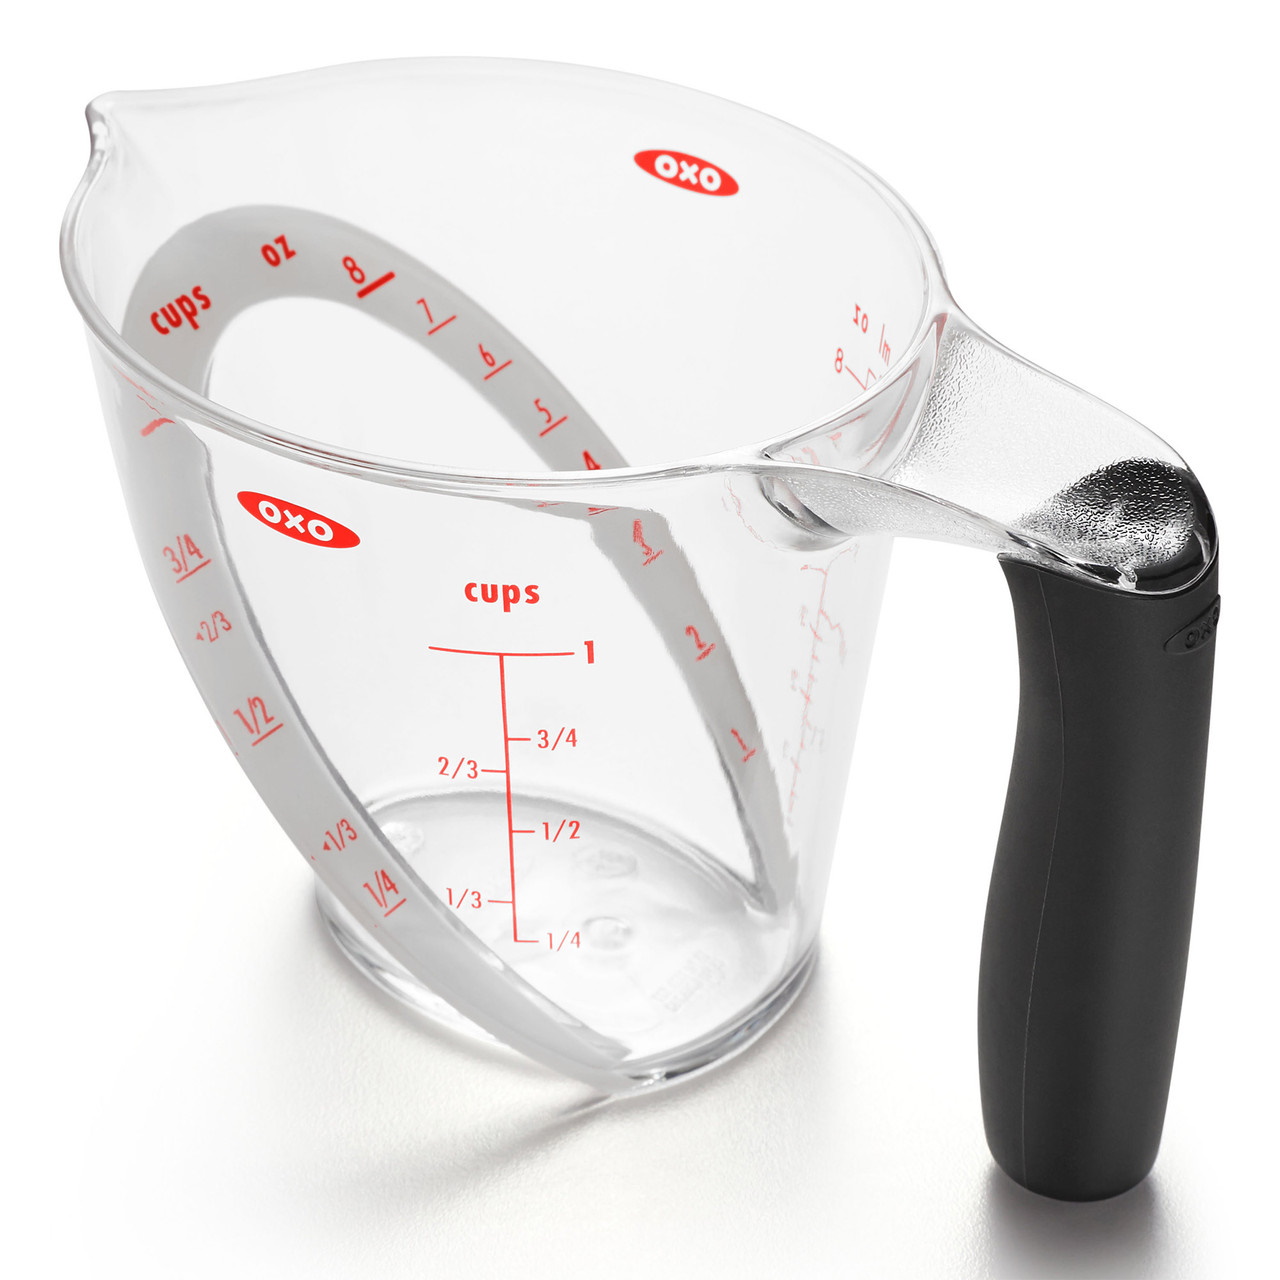 OXO GG Angled Measure Cup - 4 CUP/ 1L